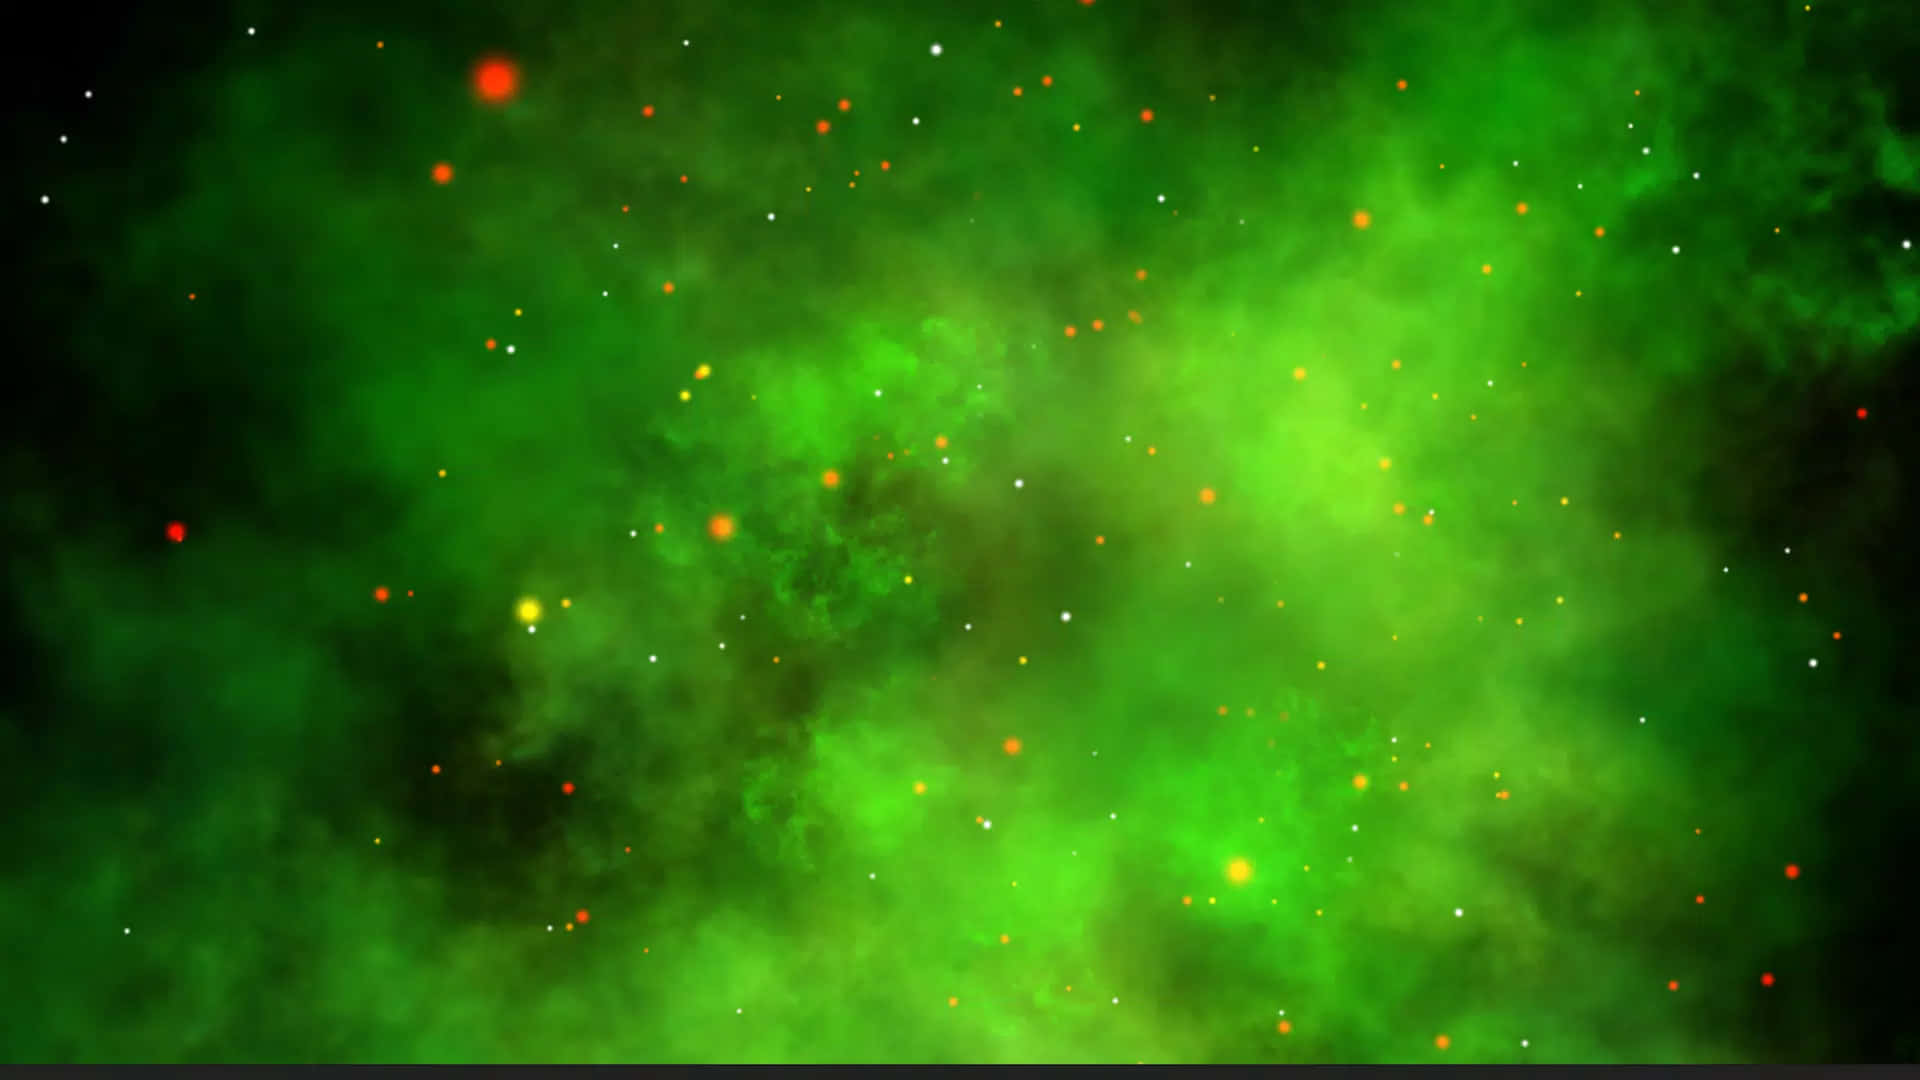 Space Background Magic Stardust And Shining Stars Bright Milky Way Violet  And Green Cosmos With Realistic Galaxy And Nebula Starry Wallpaper Vector  Illustration Stock Illustration - Download Image Now - iStock